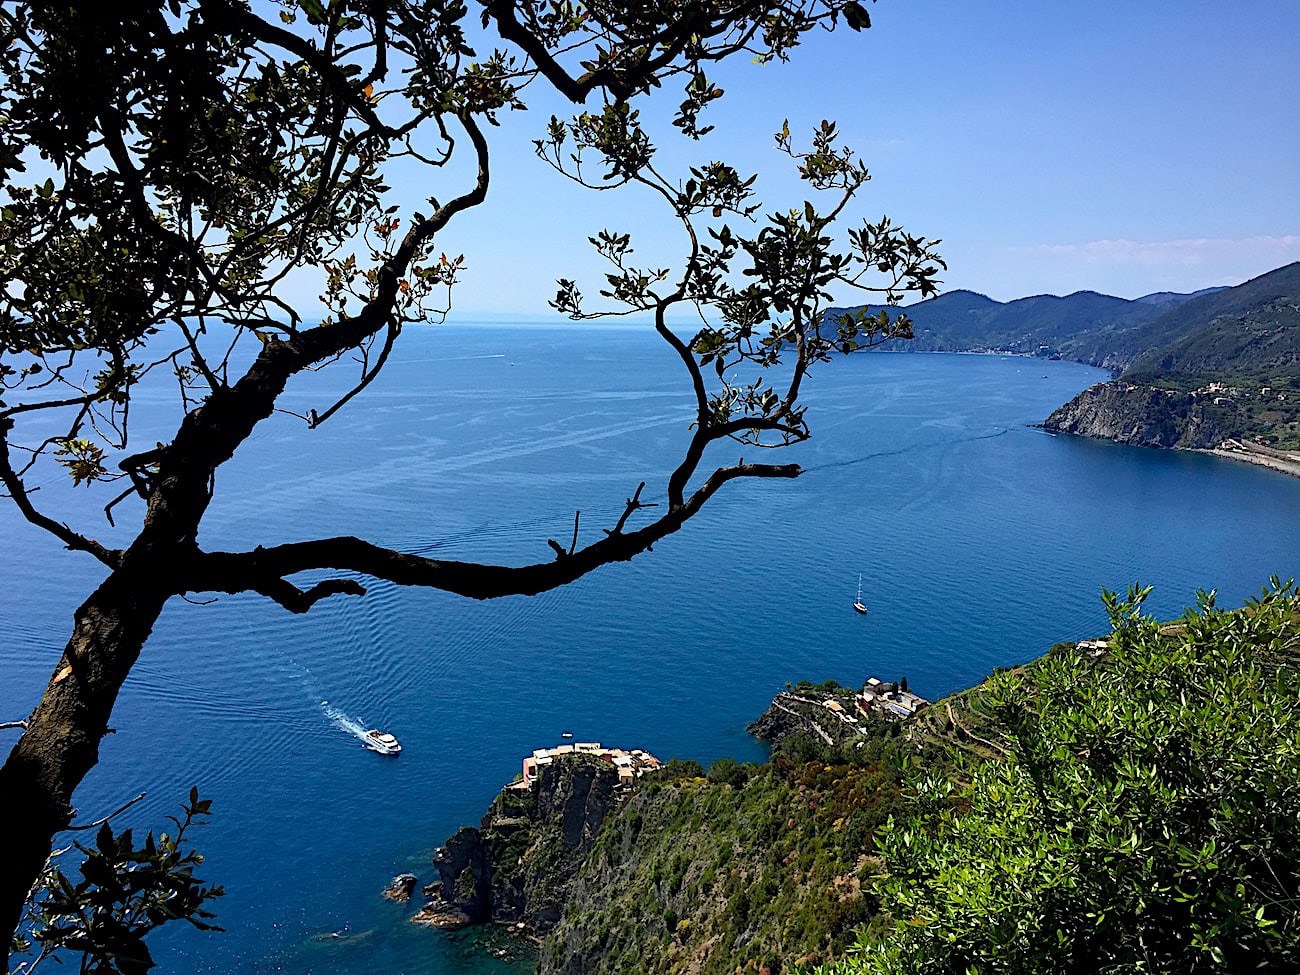 Hiking in Cinque Terre with a View